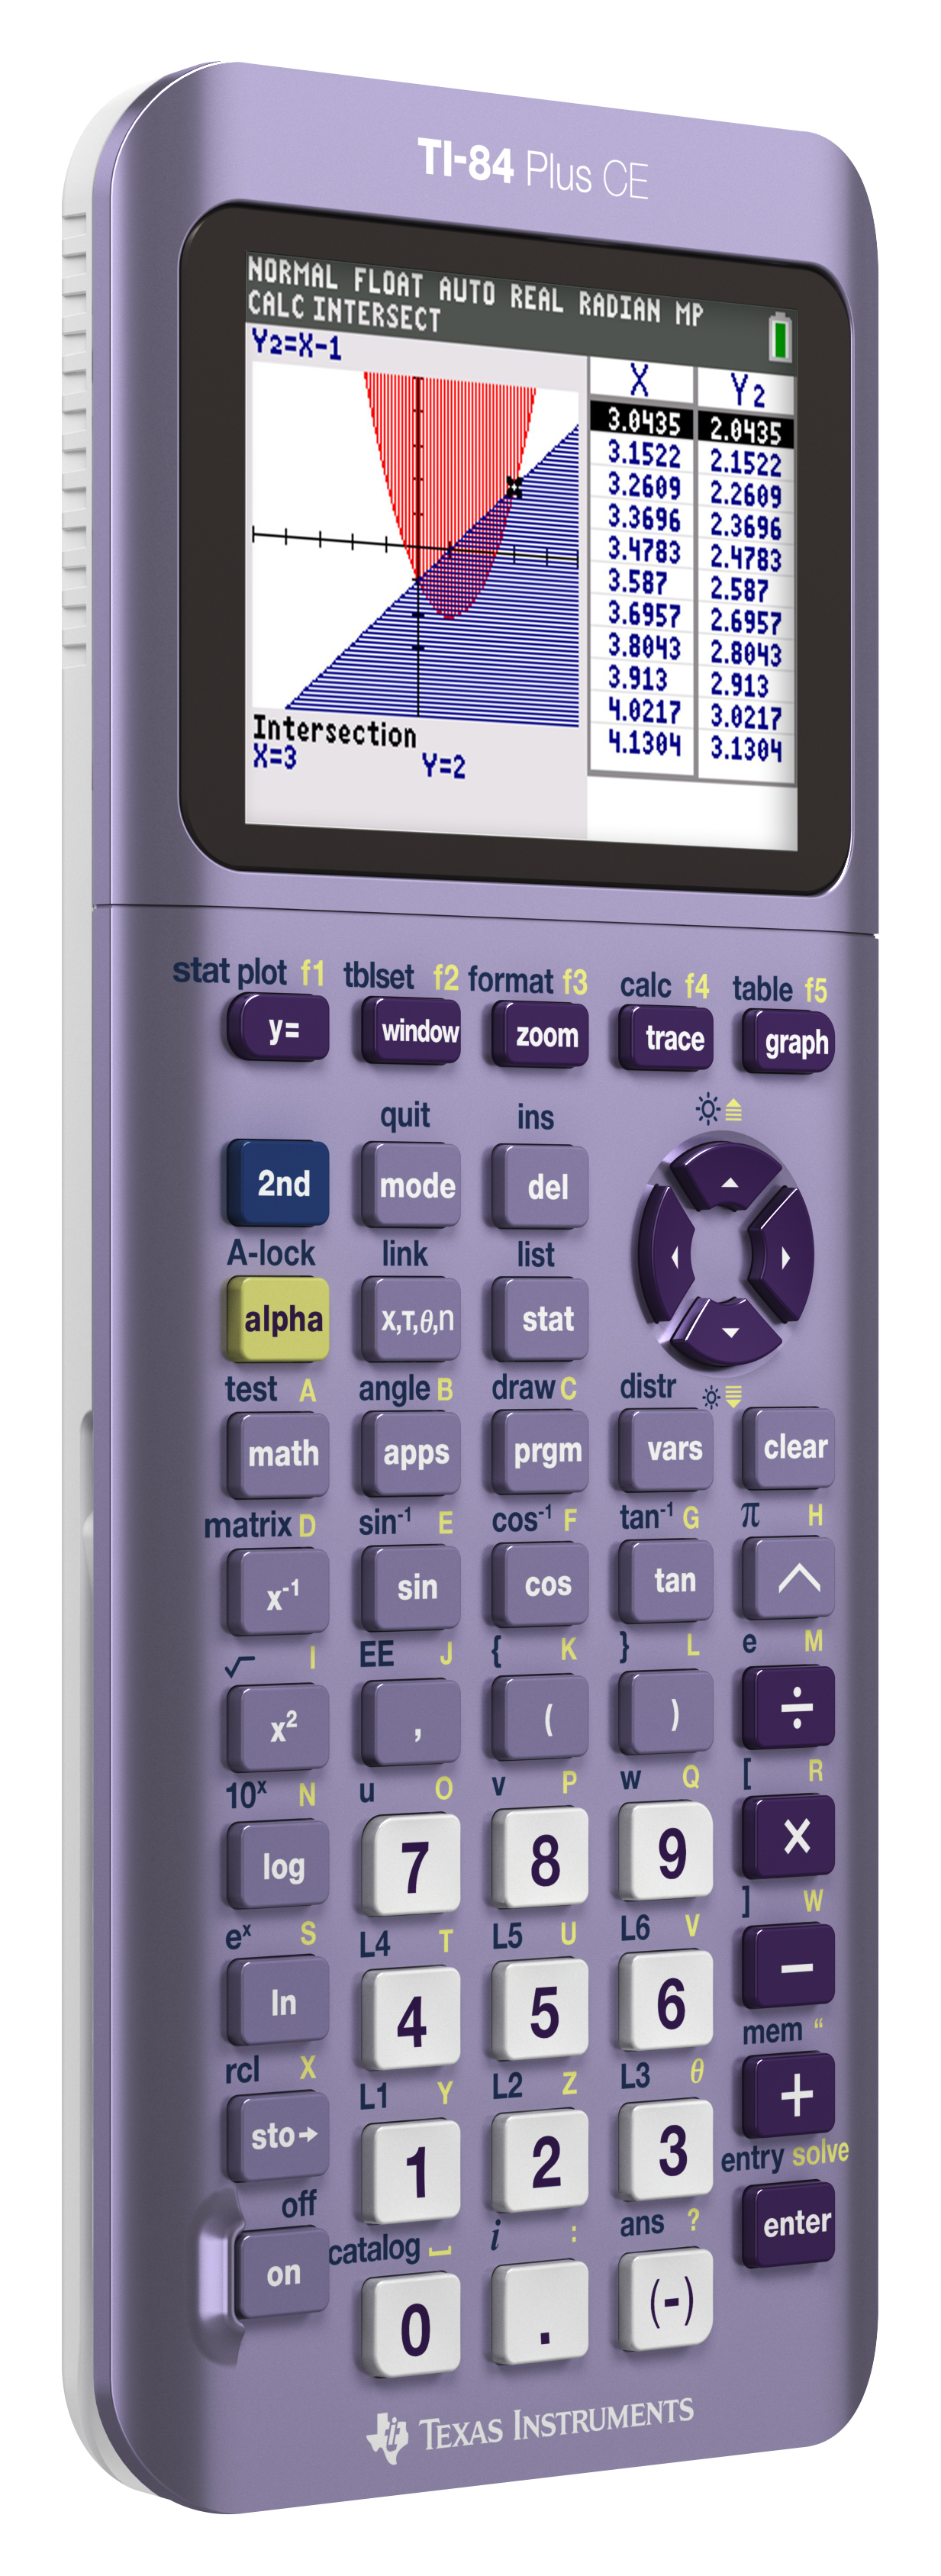 Texas Instruments Purple TI-84 Plus CE Graphing Calculator - image 4 of 4